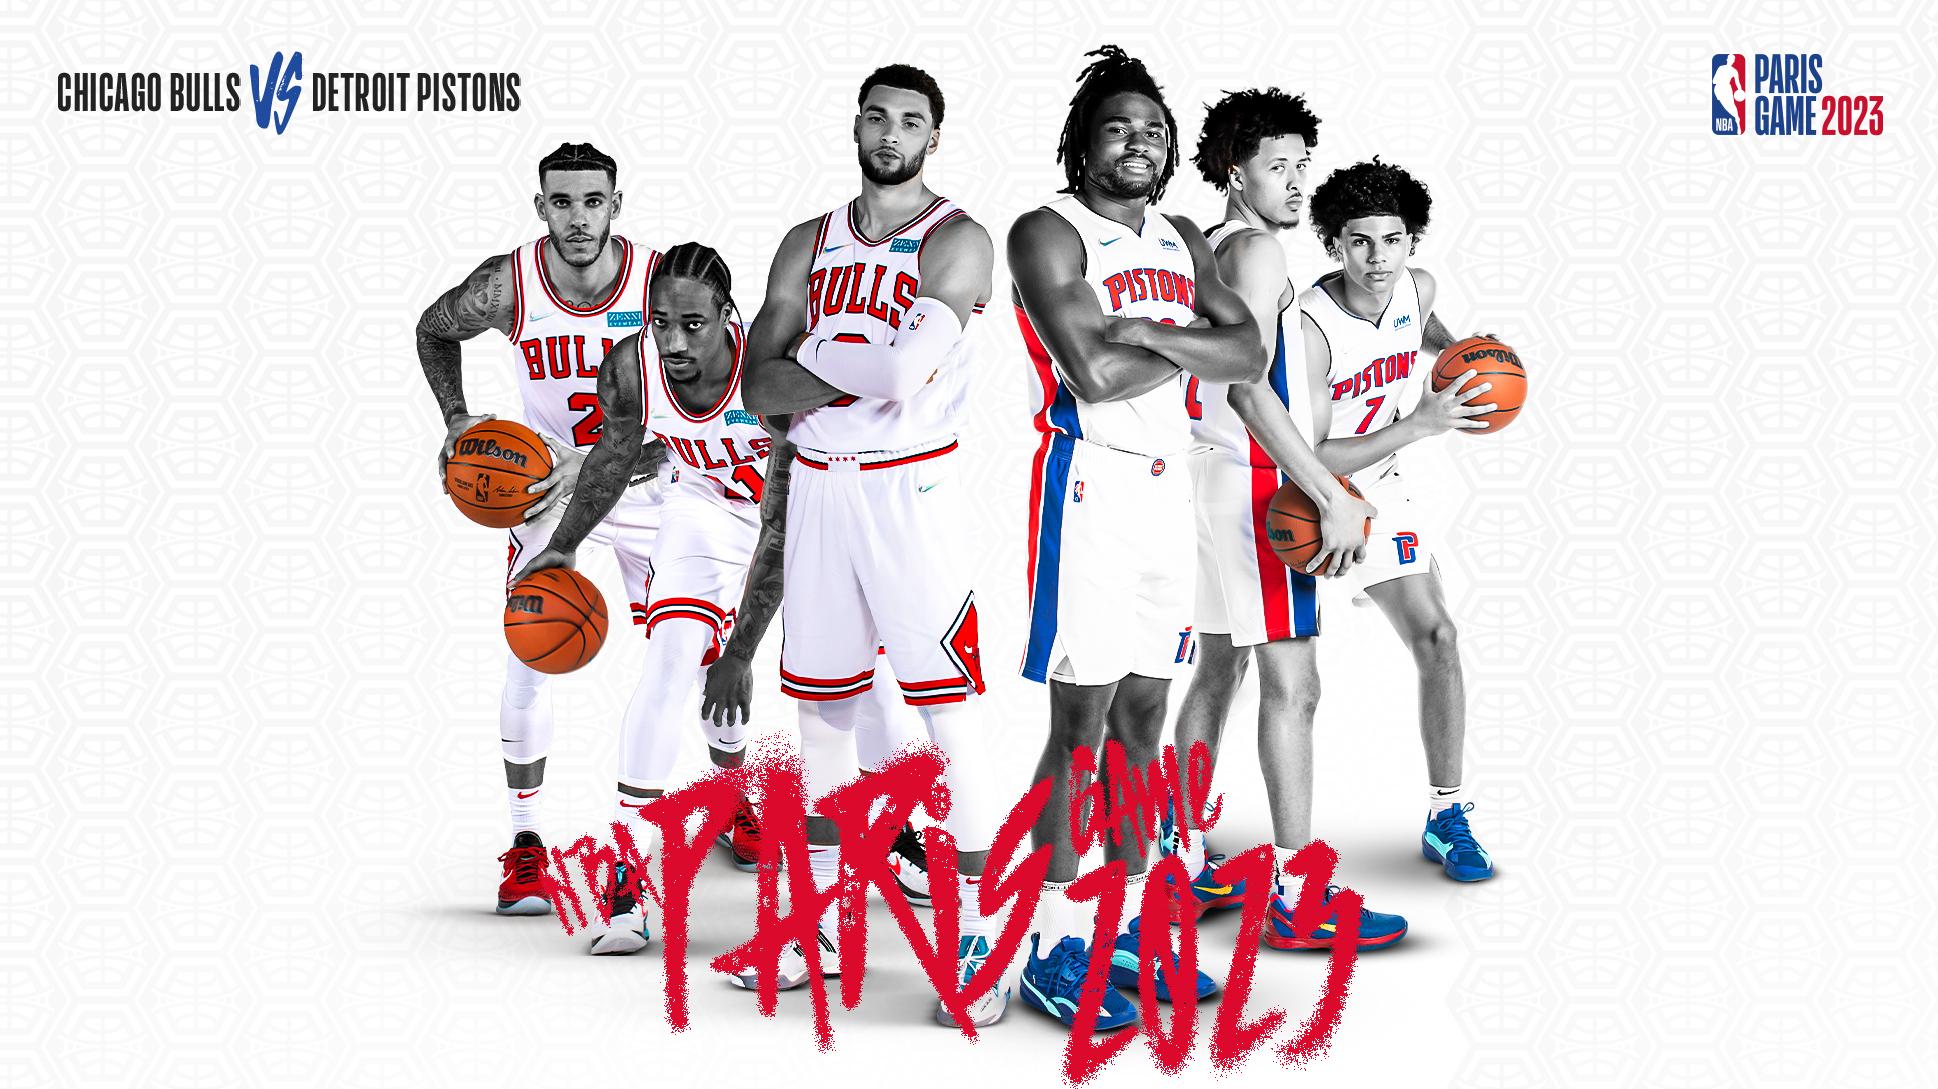 Chicago Bulls to Face Detroit Pistons in The NBA Paris Game